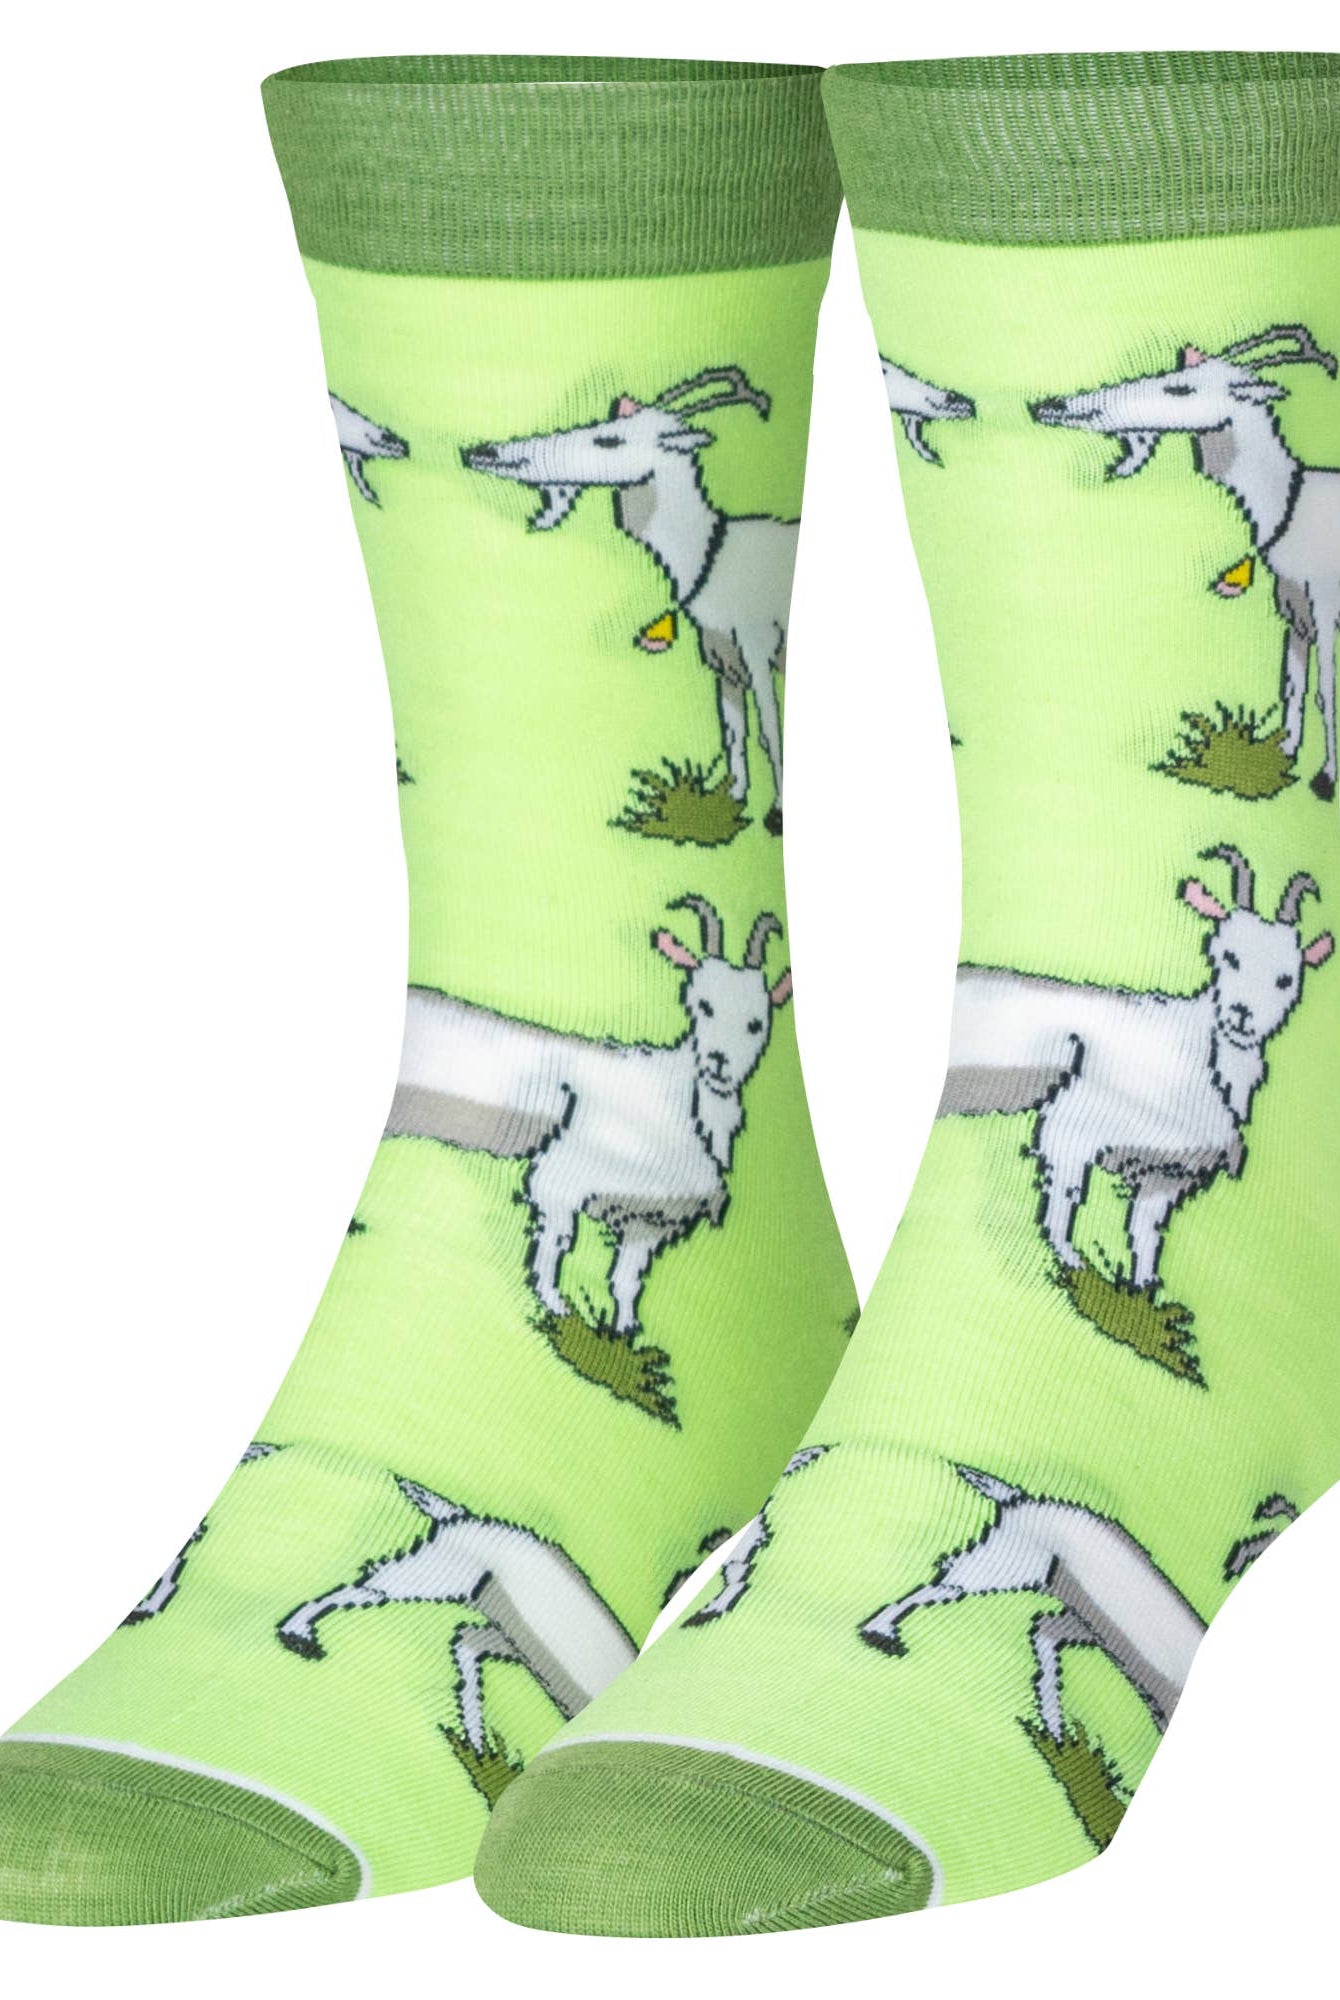 Billy Goat - Mens Crew Folded Crazy Socks | Stuffology Boutique-Socks-Crazy Socks-Stuffology - Where Vintage Meets Modern, A Boutique for Real Women in Crosbyton, TX